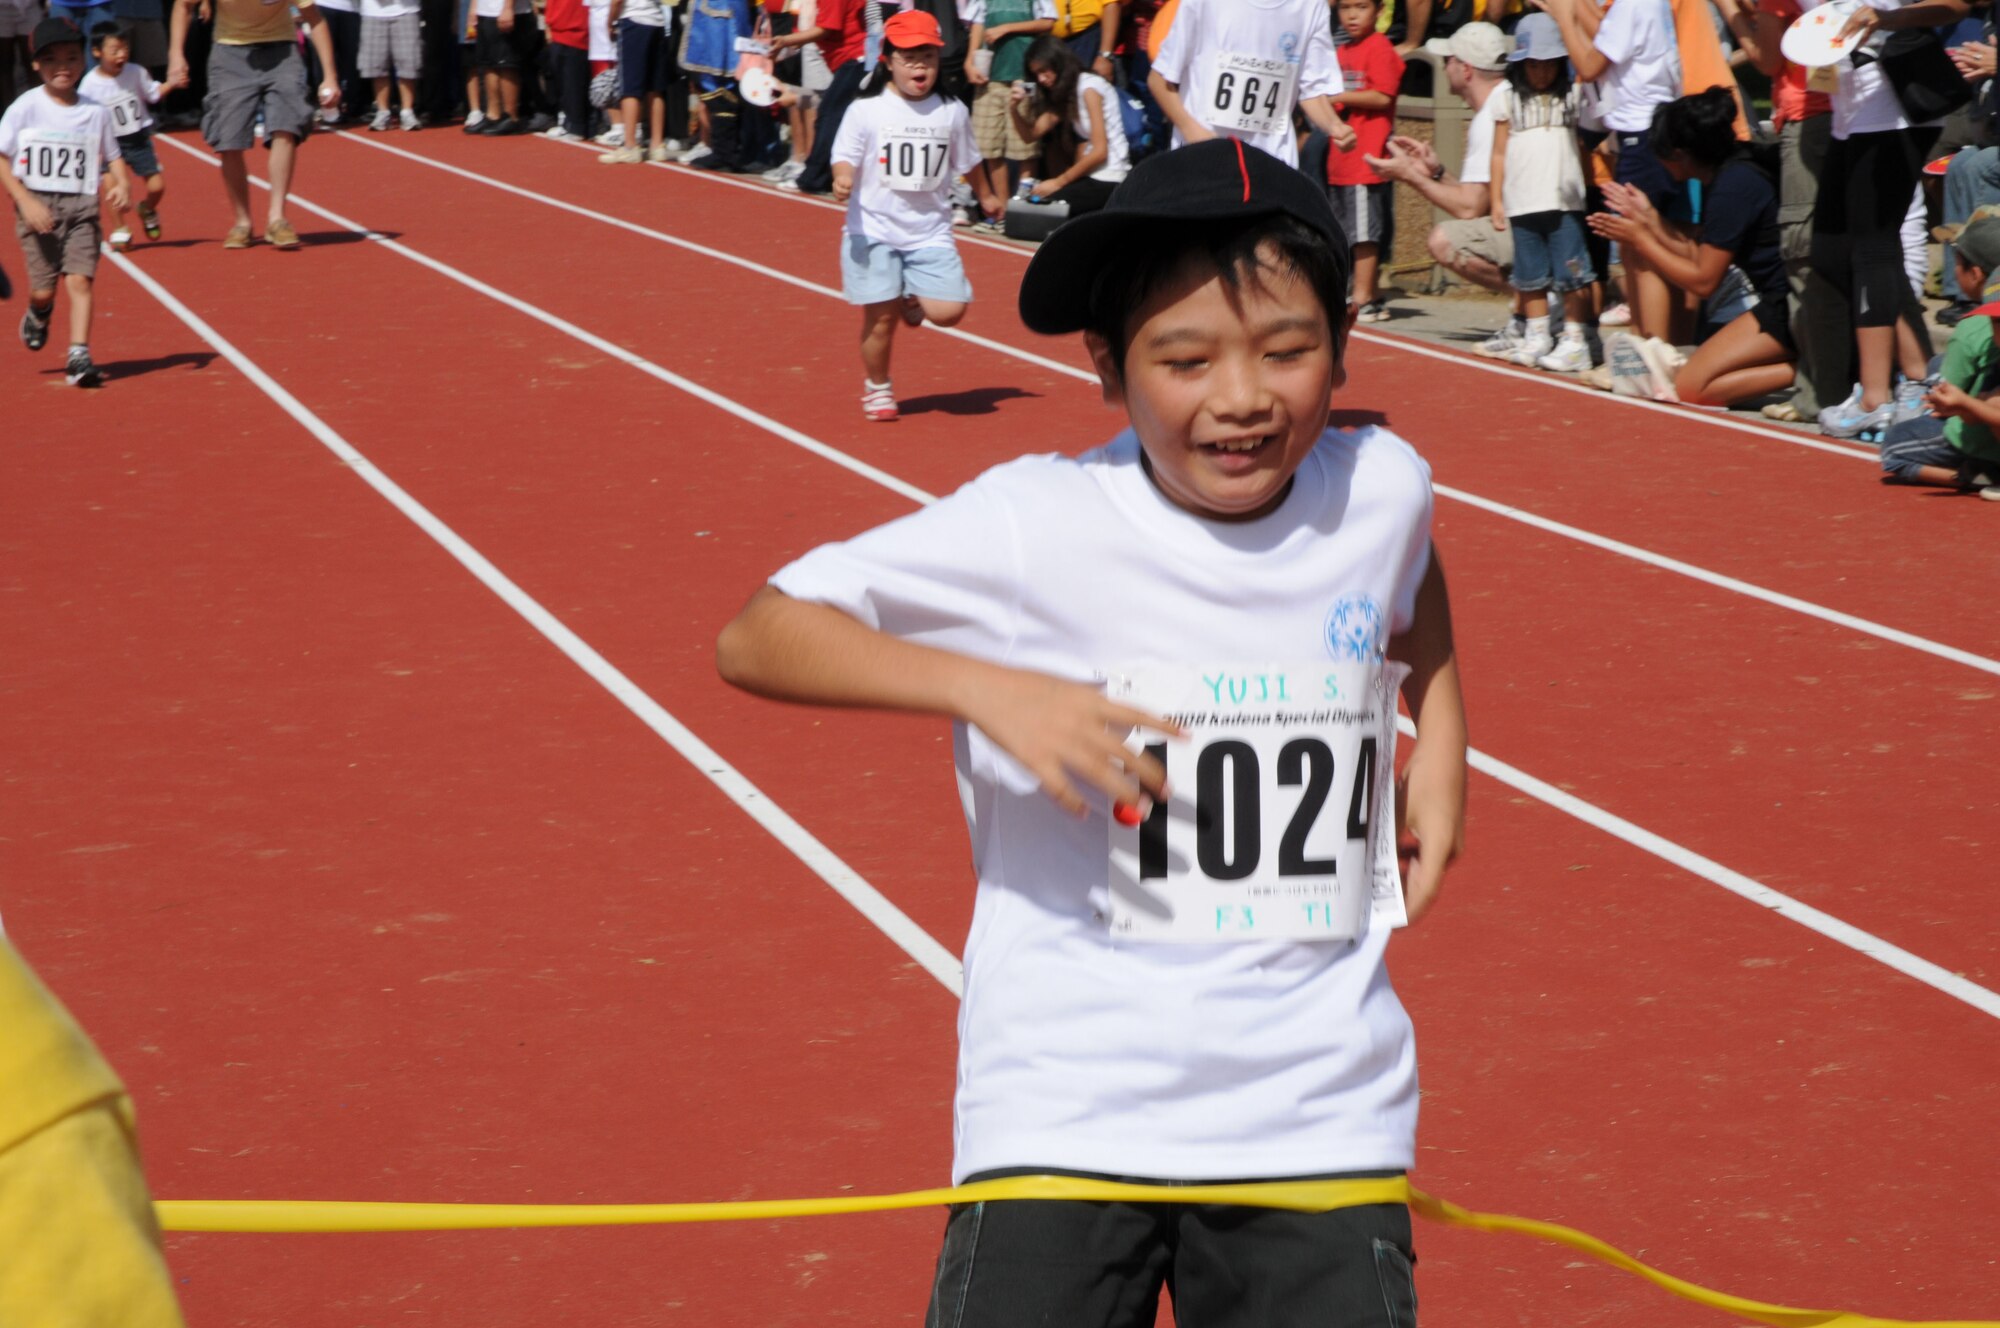 Yuji-san crosses the finish line after competing in the 30 meter dash during the Kadena Special Olympics Nov. 8, 2008, Kadena Air Base, Japan. Kadena hosted the 9th Annual Special Olympic Games and Art Festival for special needs Okinawan and American adult and child athletes.(U.S. Air Force photo/Airman 1st Class Amanda Grabiec)    
                                             